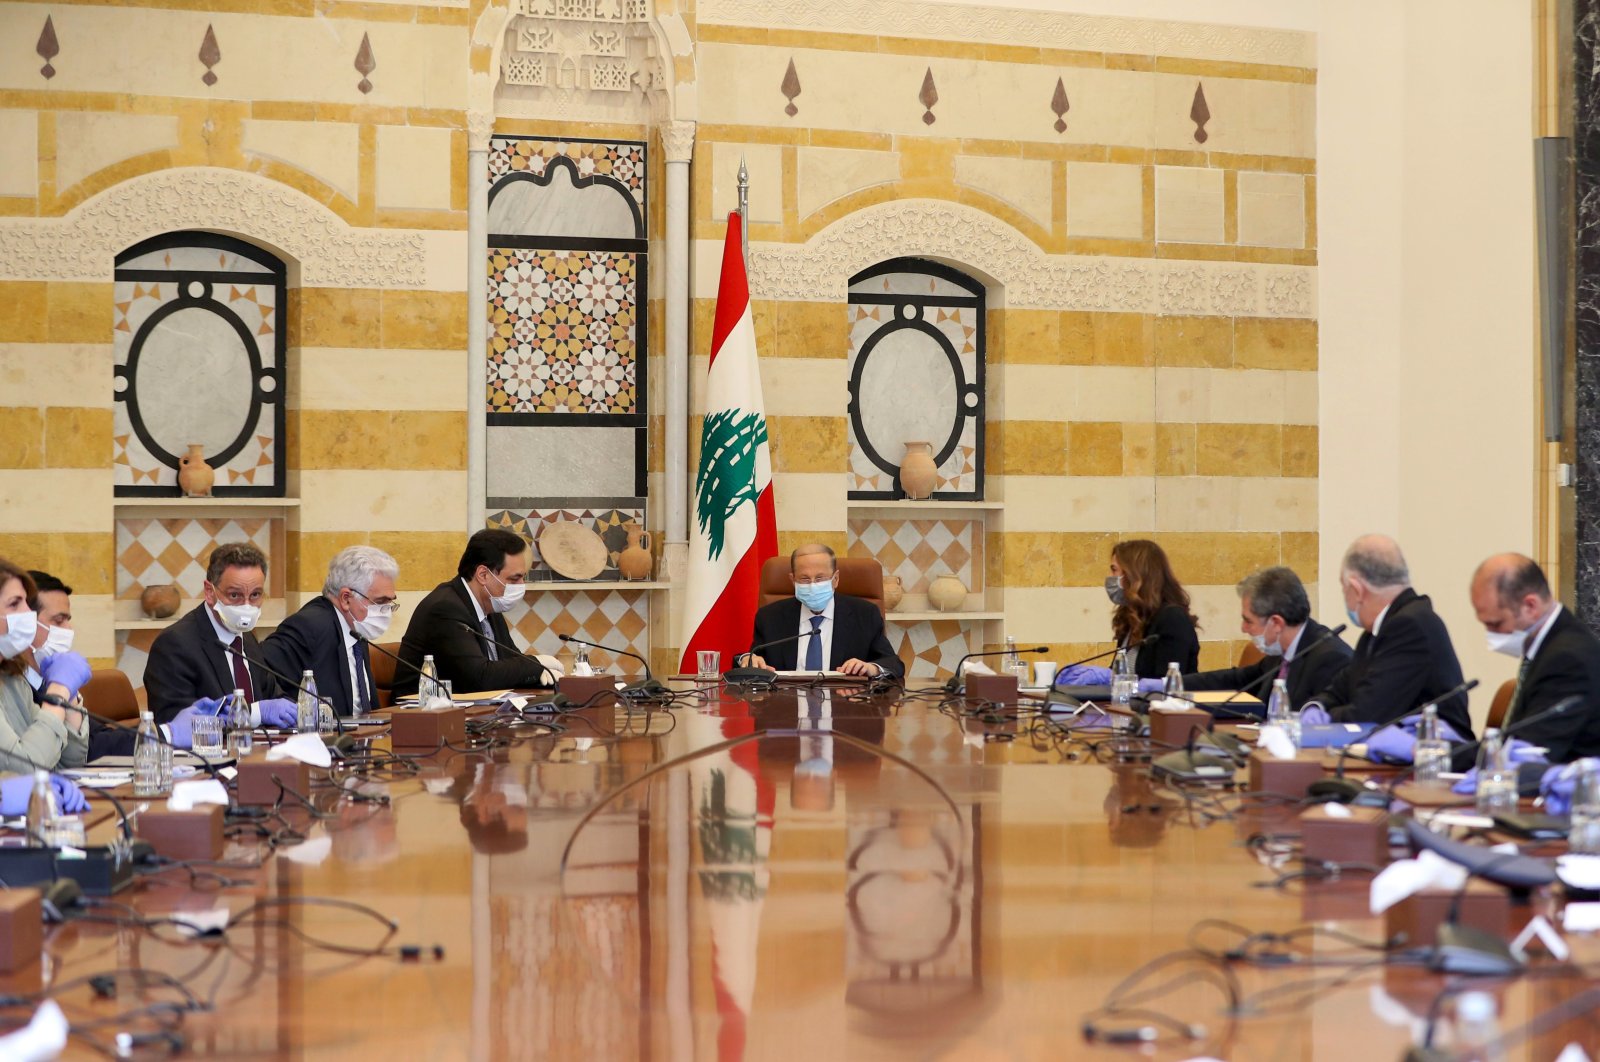 President Michel Aoun (C) chairs a meeting of the Supreme Council of Defense, in the presence of Prime Minister Hassan Diab (C-L), at the presidential palace in Baabda, Beirut, Apr. 24, 2020. (AFP Photo)